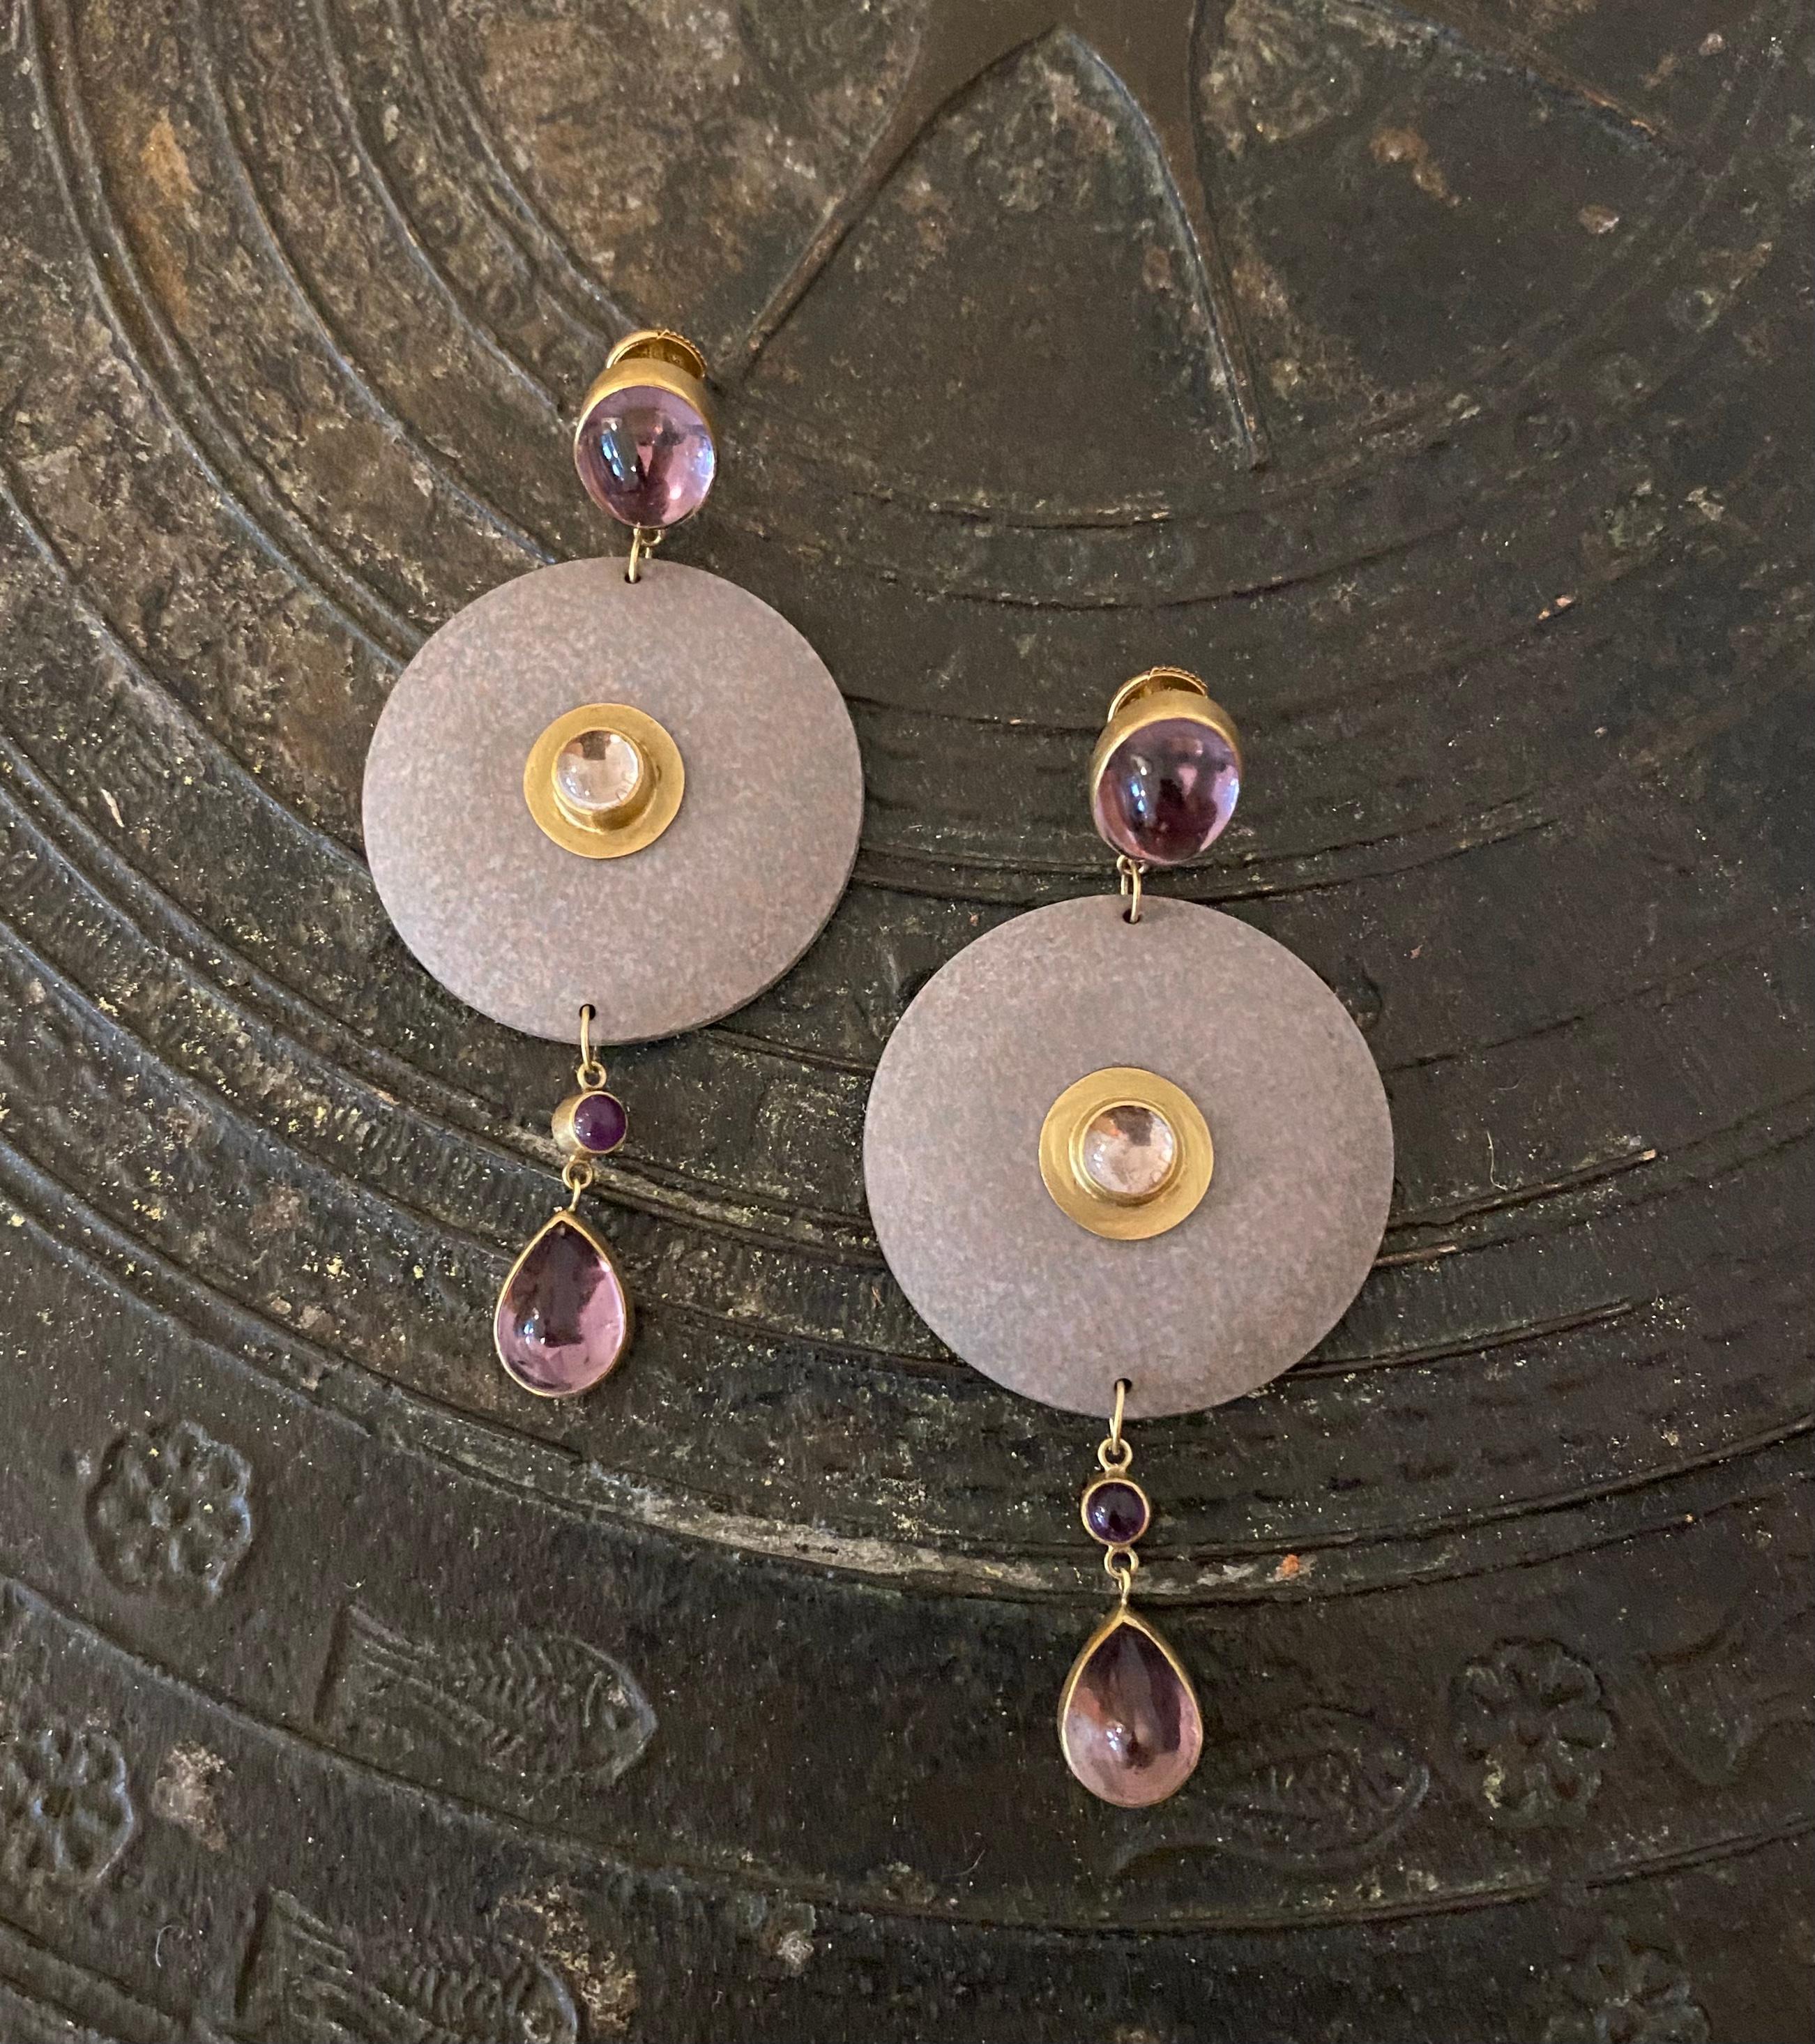 Wendy Ramshaw Pair of Amethyst, Wedgwood Ceramic and 18K Gold Earrings, 1994 In Excellent Condition For Sale In New York, NY